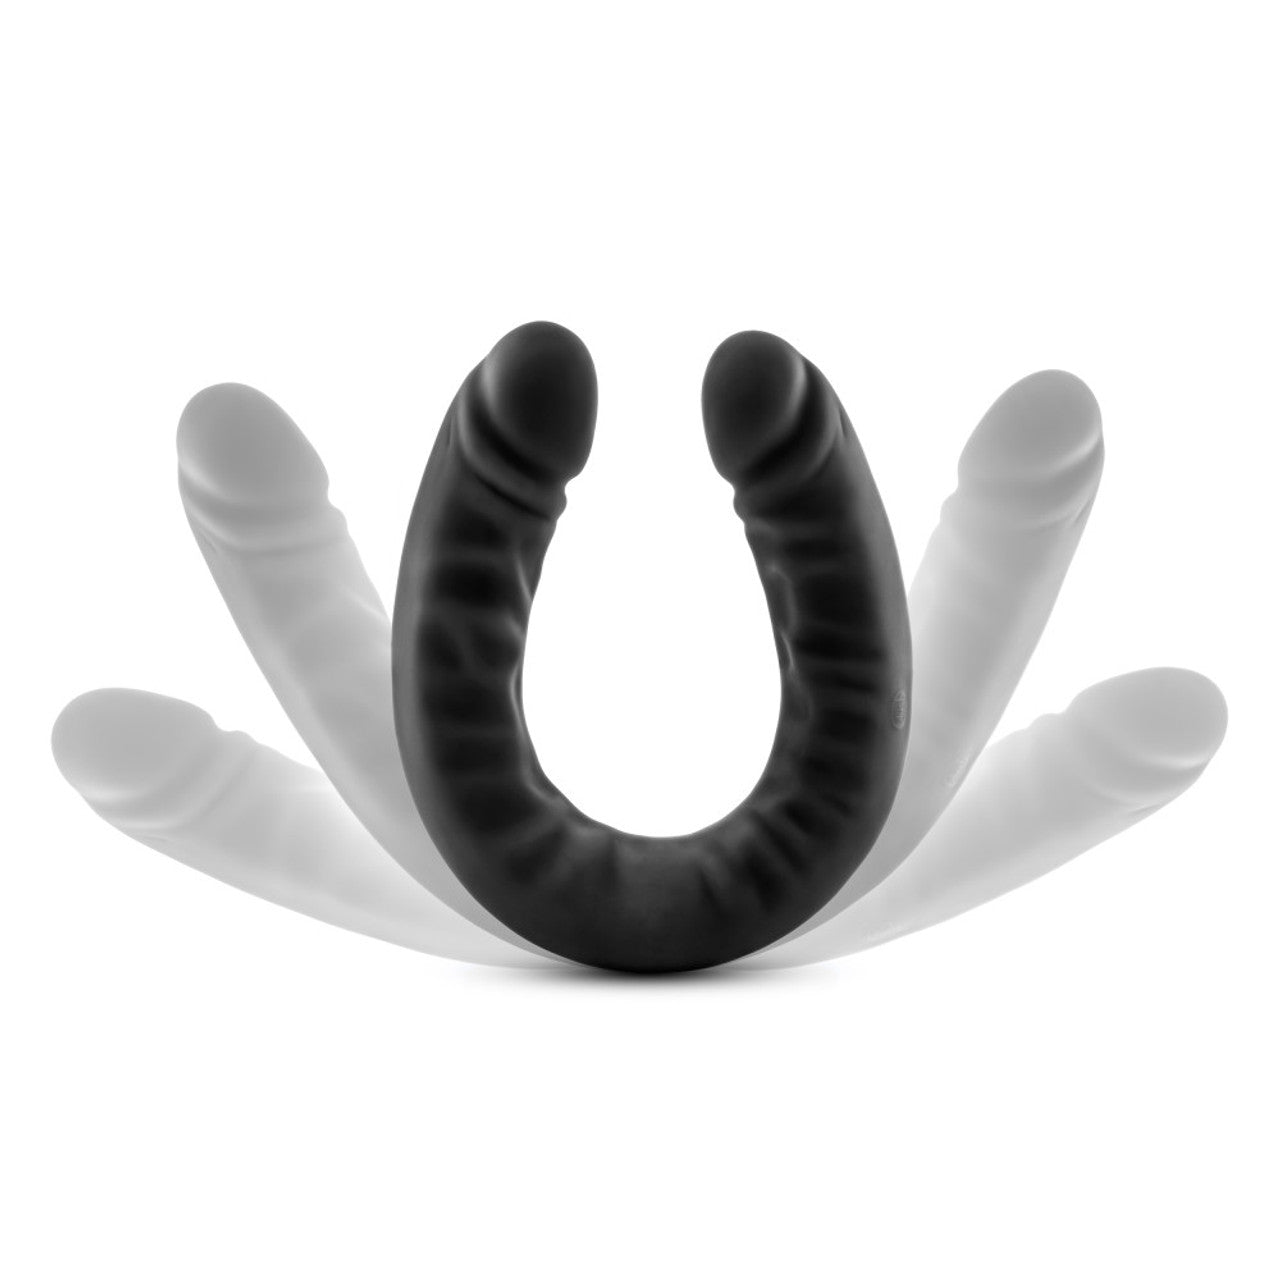 Ruse 18" Silicone Double Headed Dildo - Black - Thorn & Feather